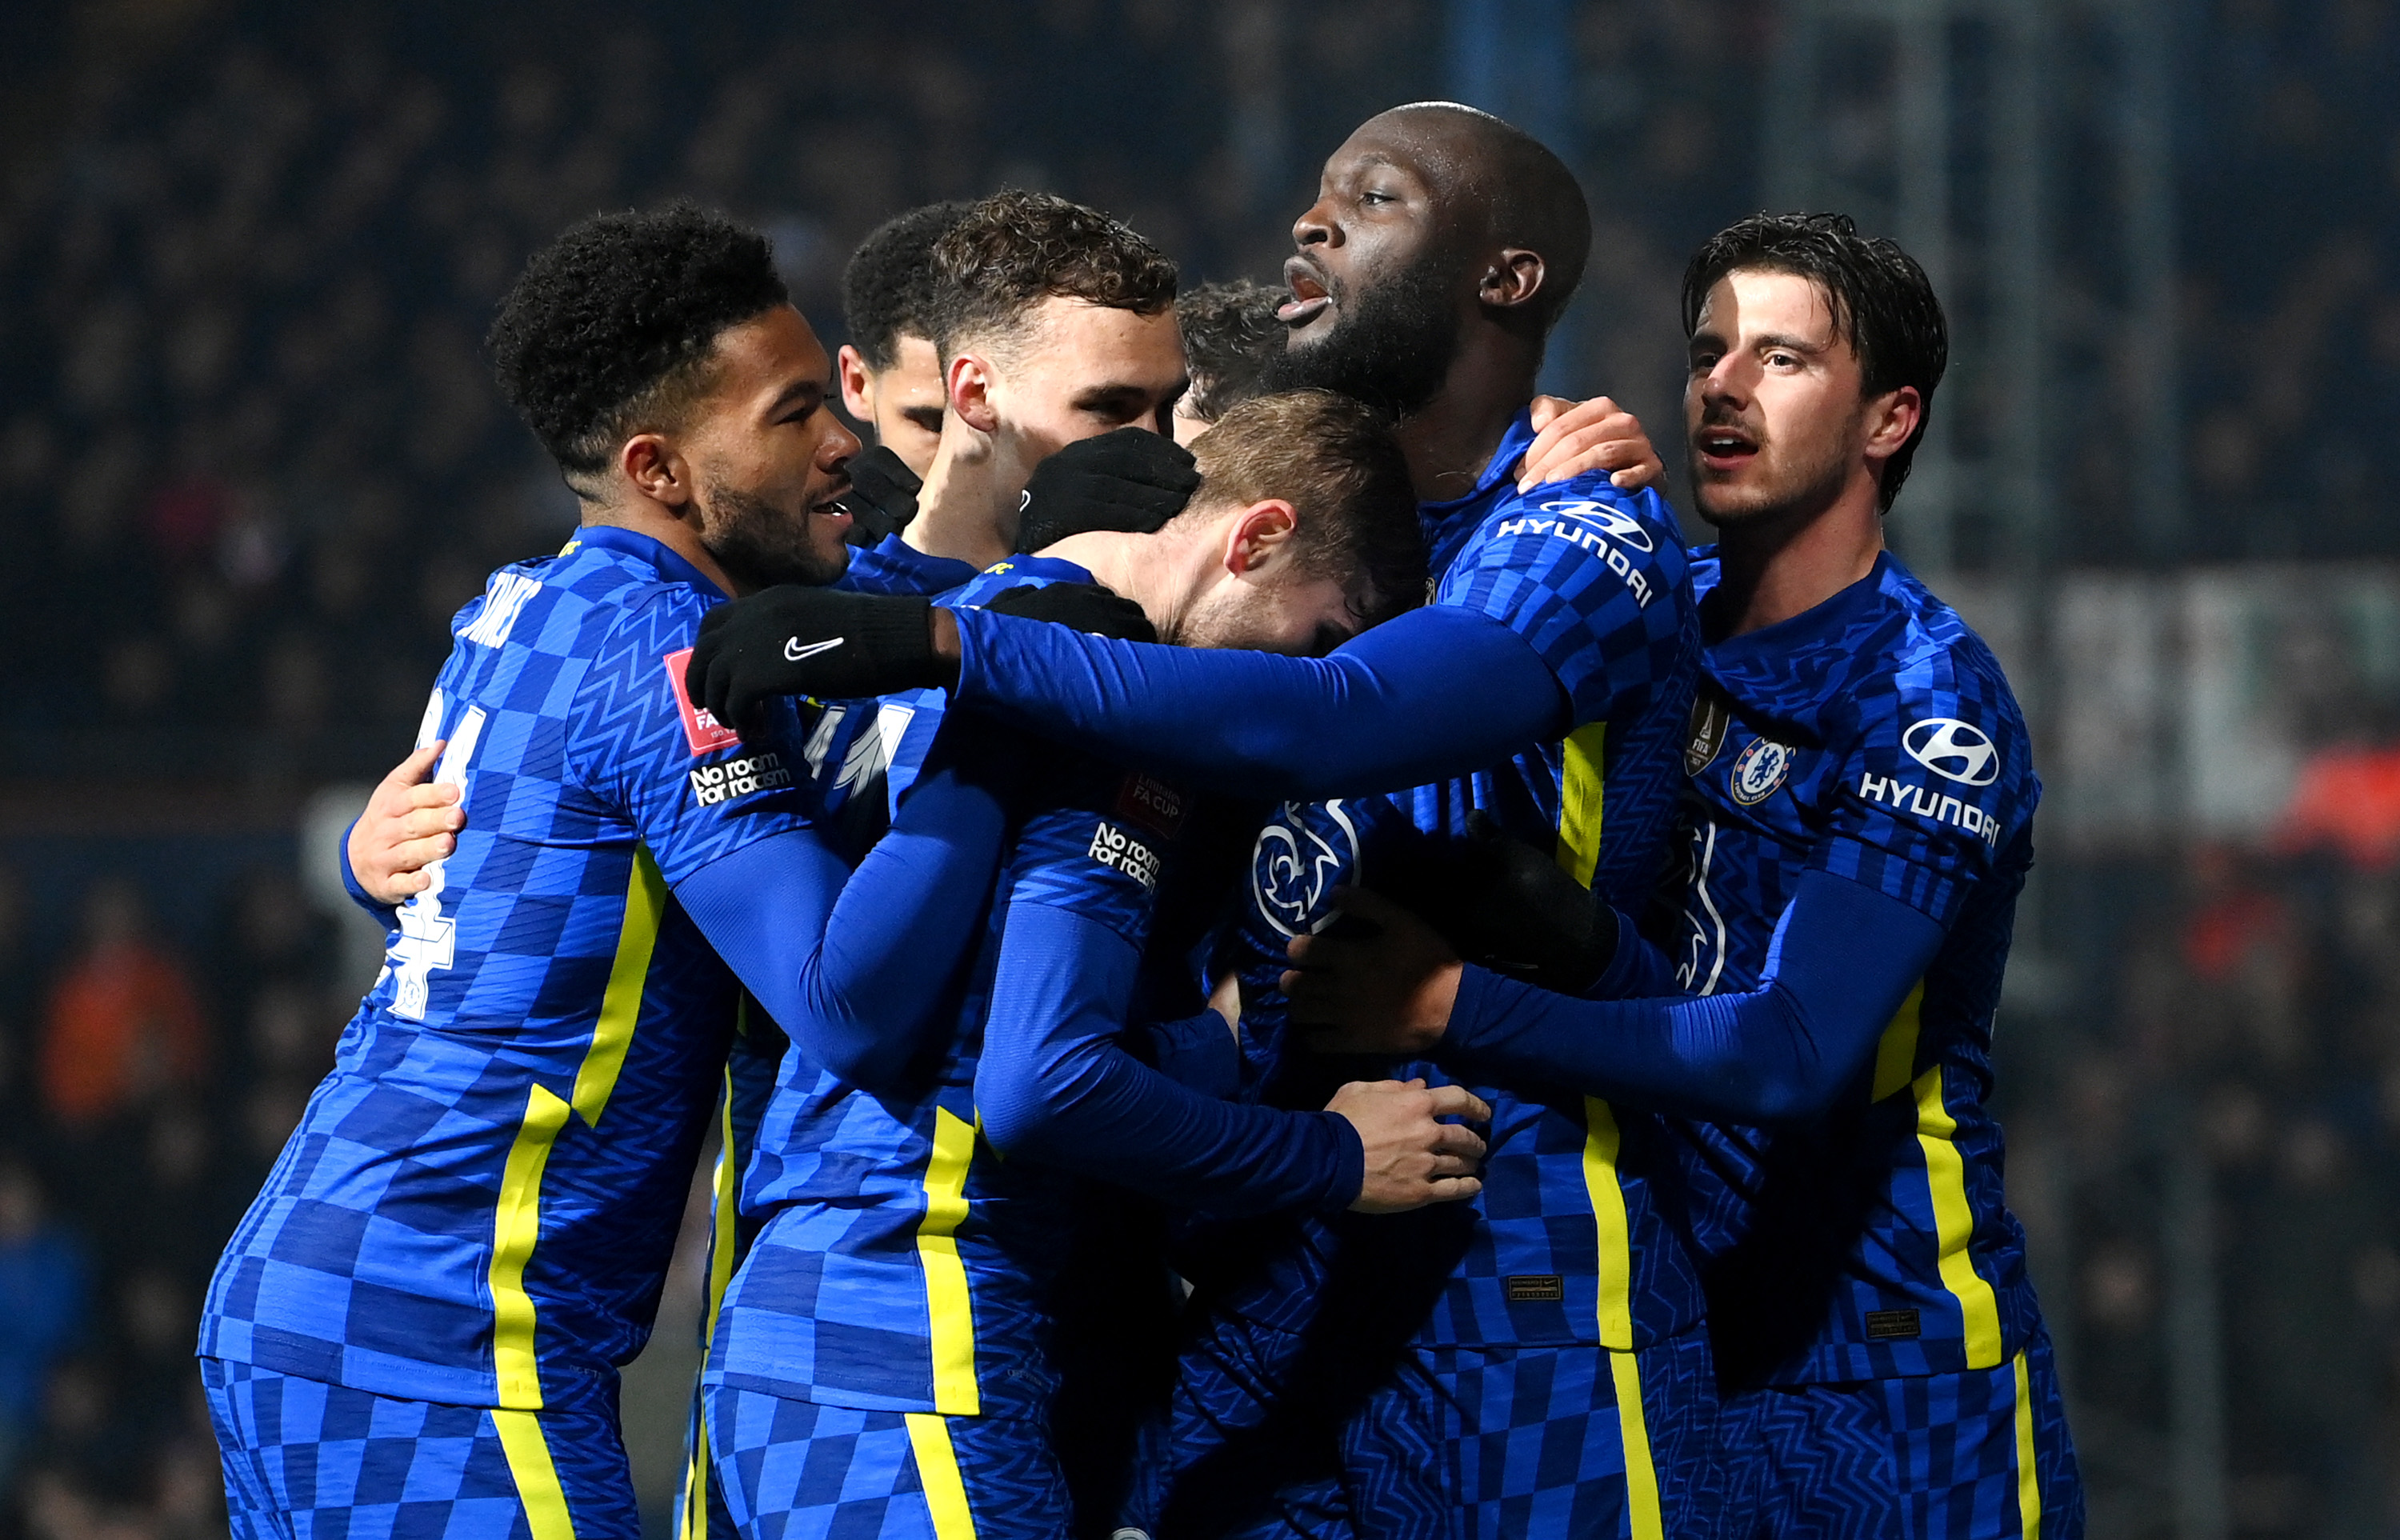 Luton Town 2-3 Chelsea Highlights: Chelsea avoid Luton Town scare in the Emirates FA Cup with Romelu Lukaku completing the comeback for the Blues